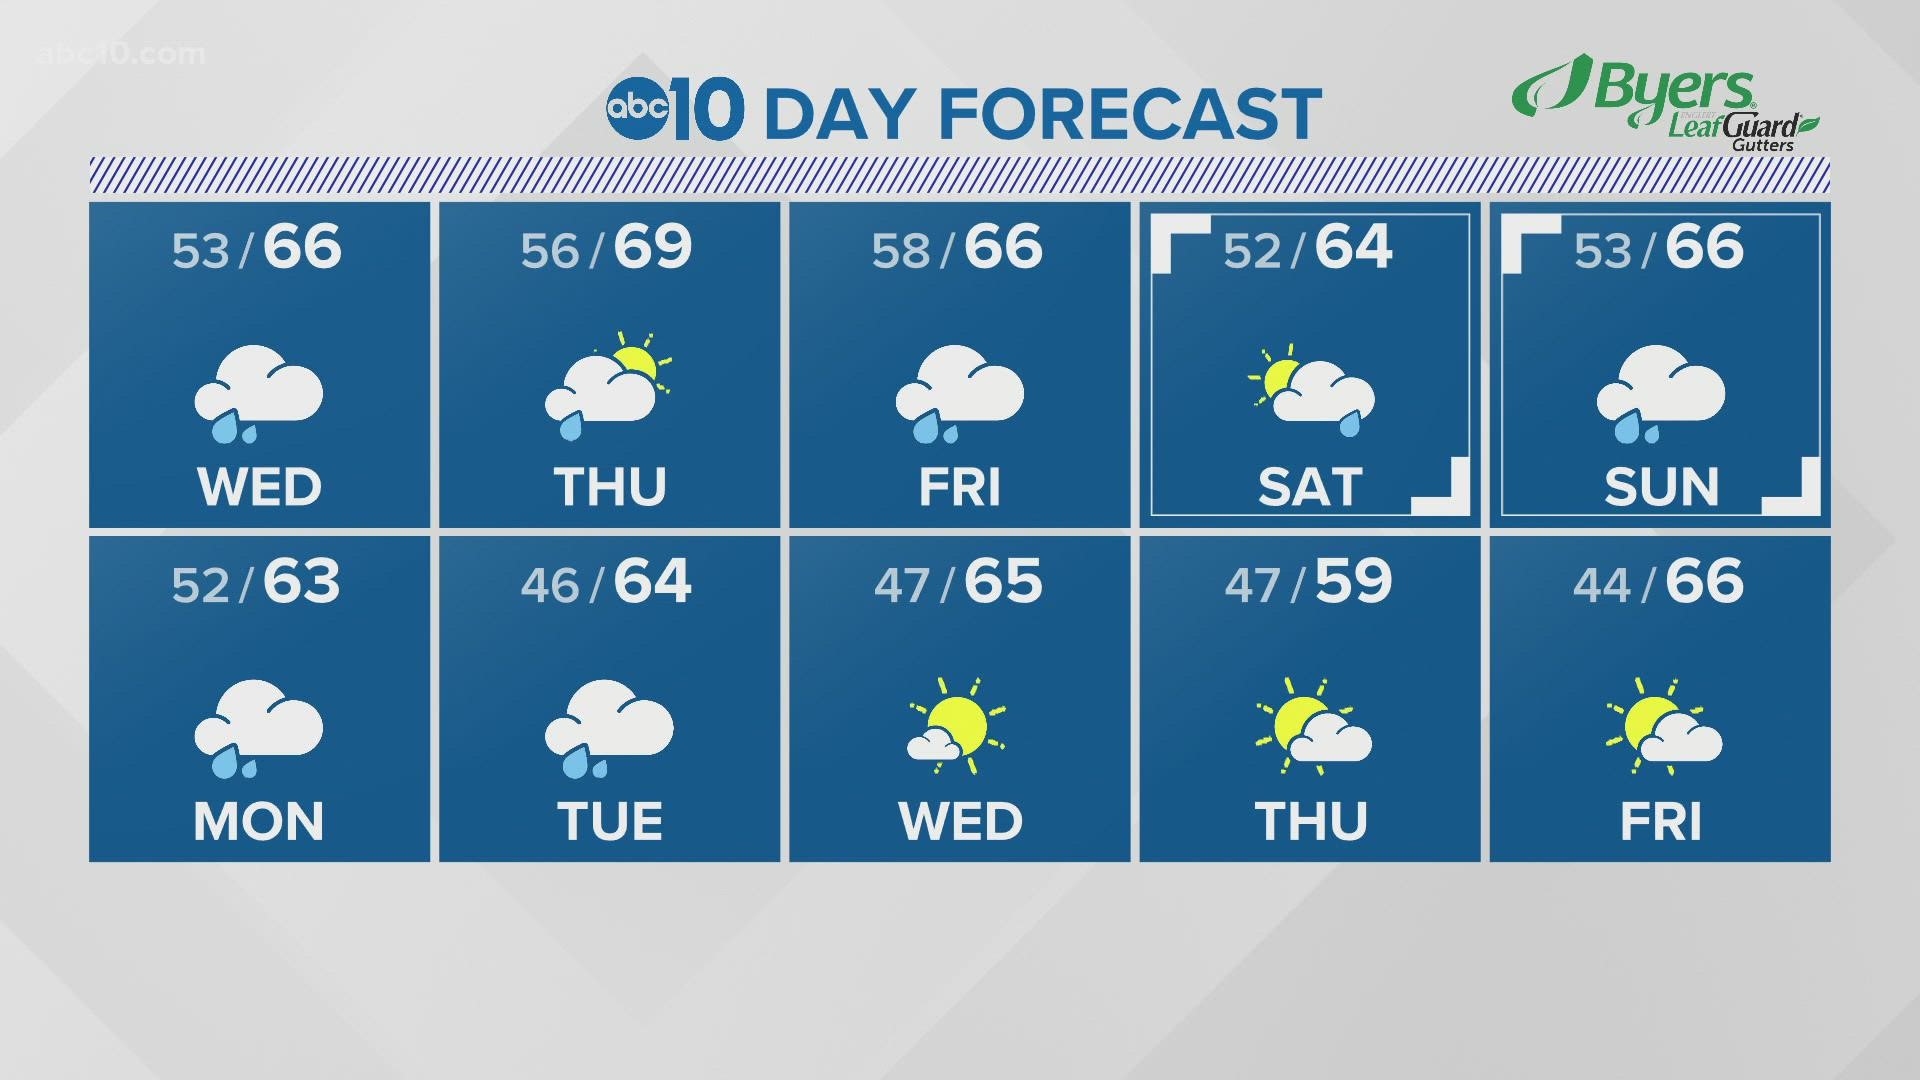 Here's what the next 10 days of weather are going to look like.